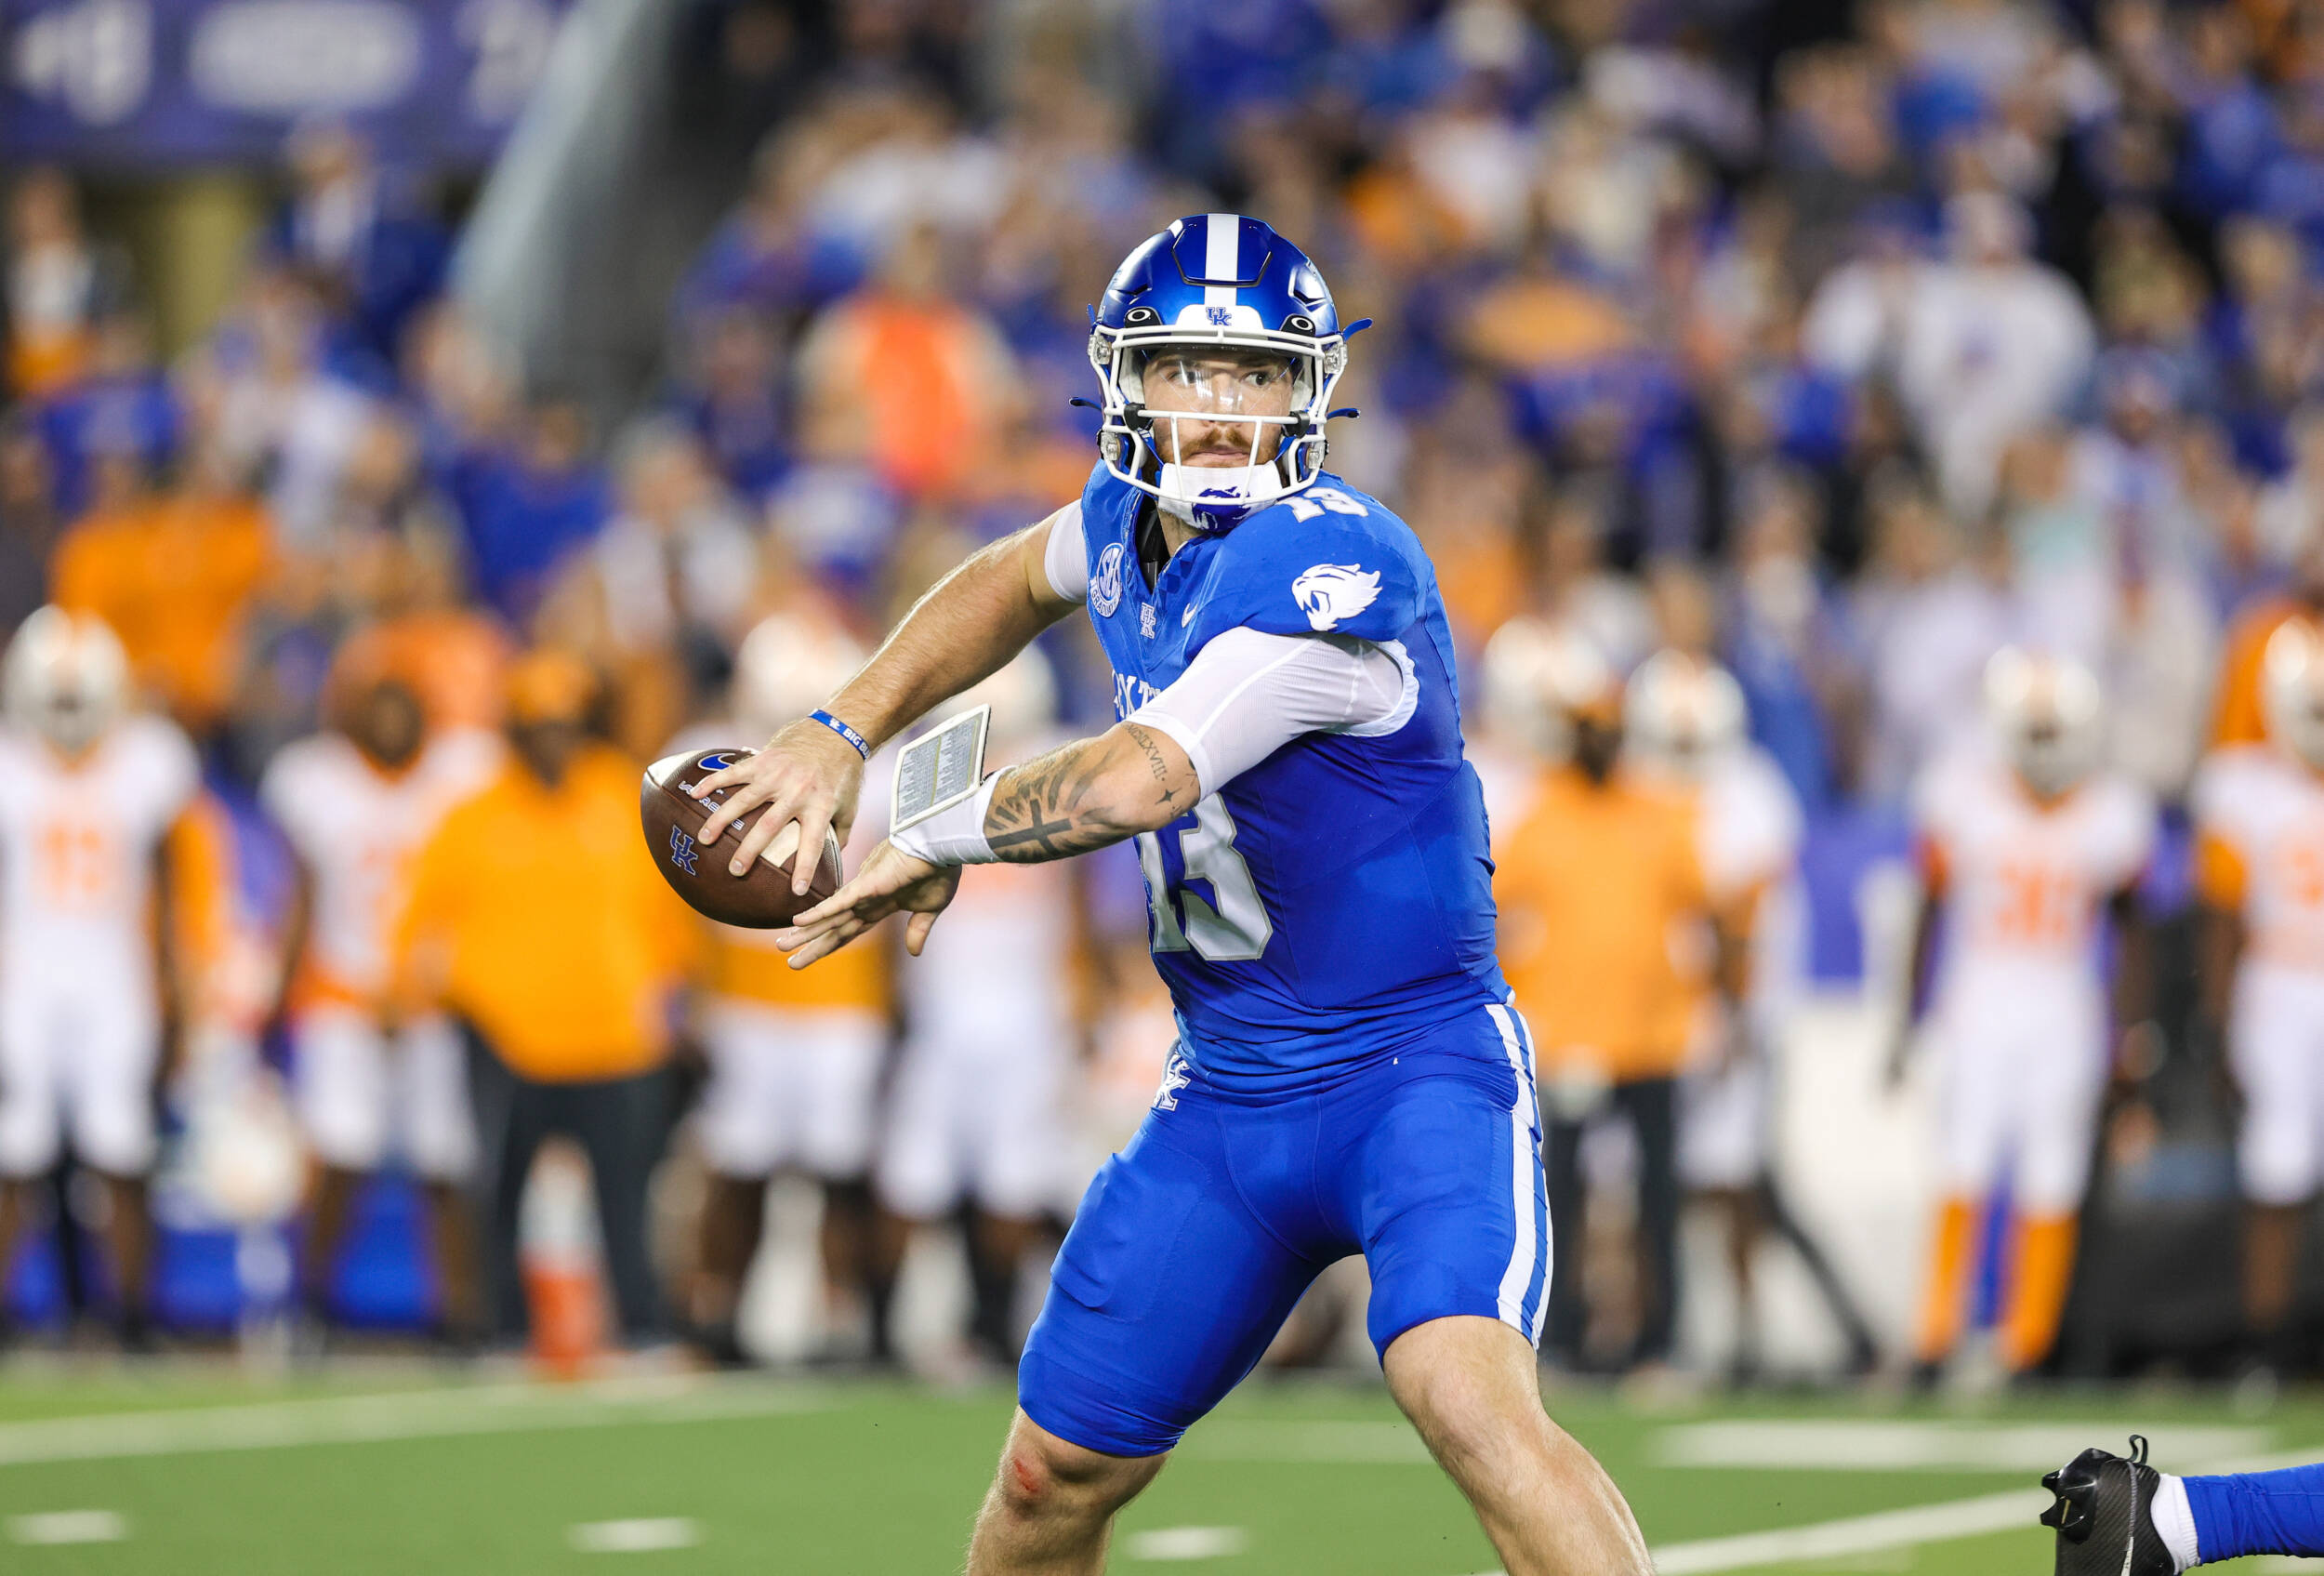 Kentucky Falls to No. 21 Tennessee on Saturday